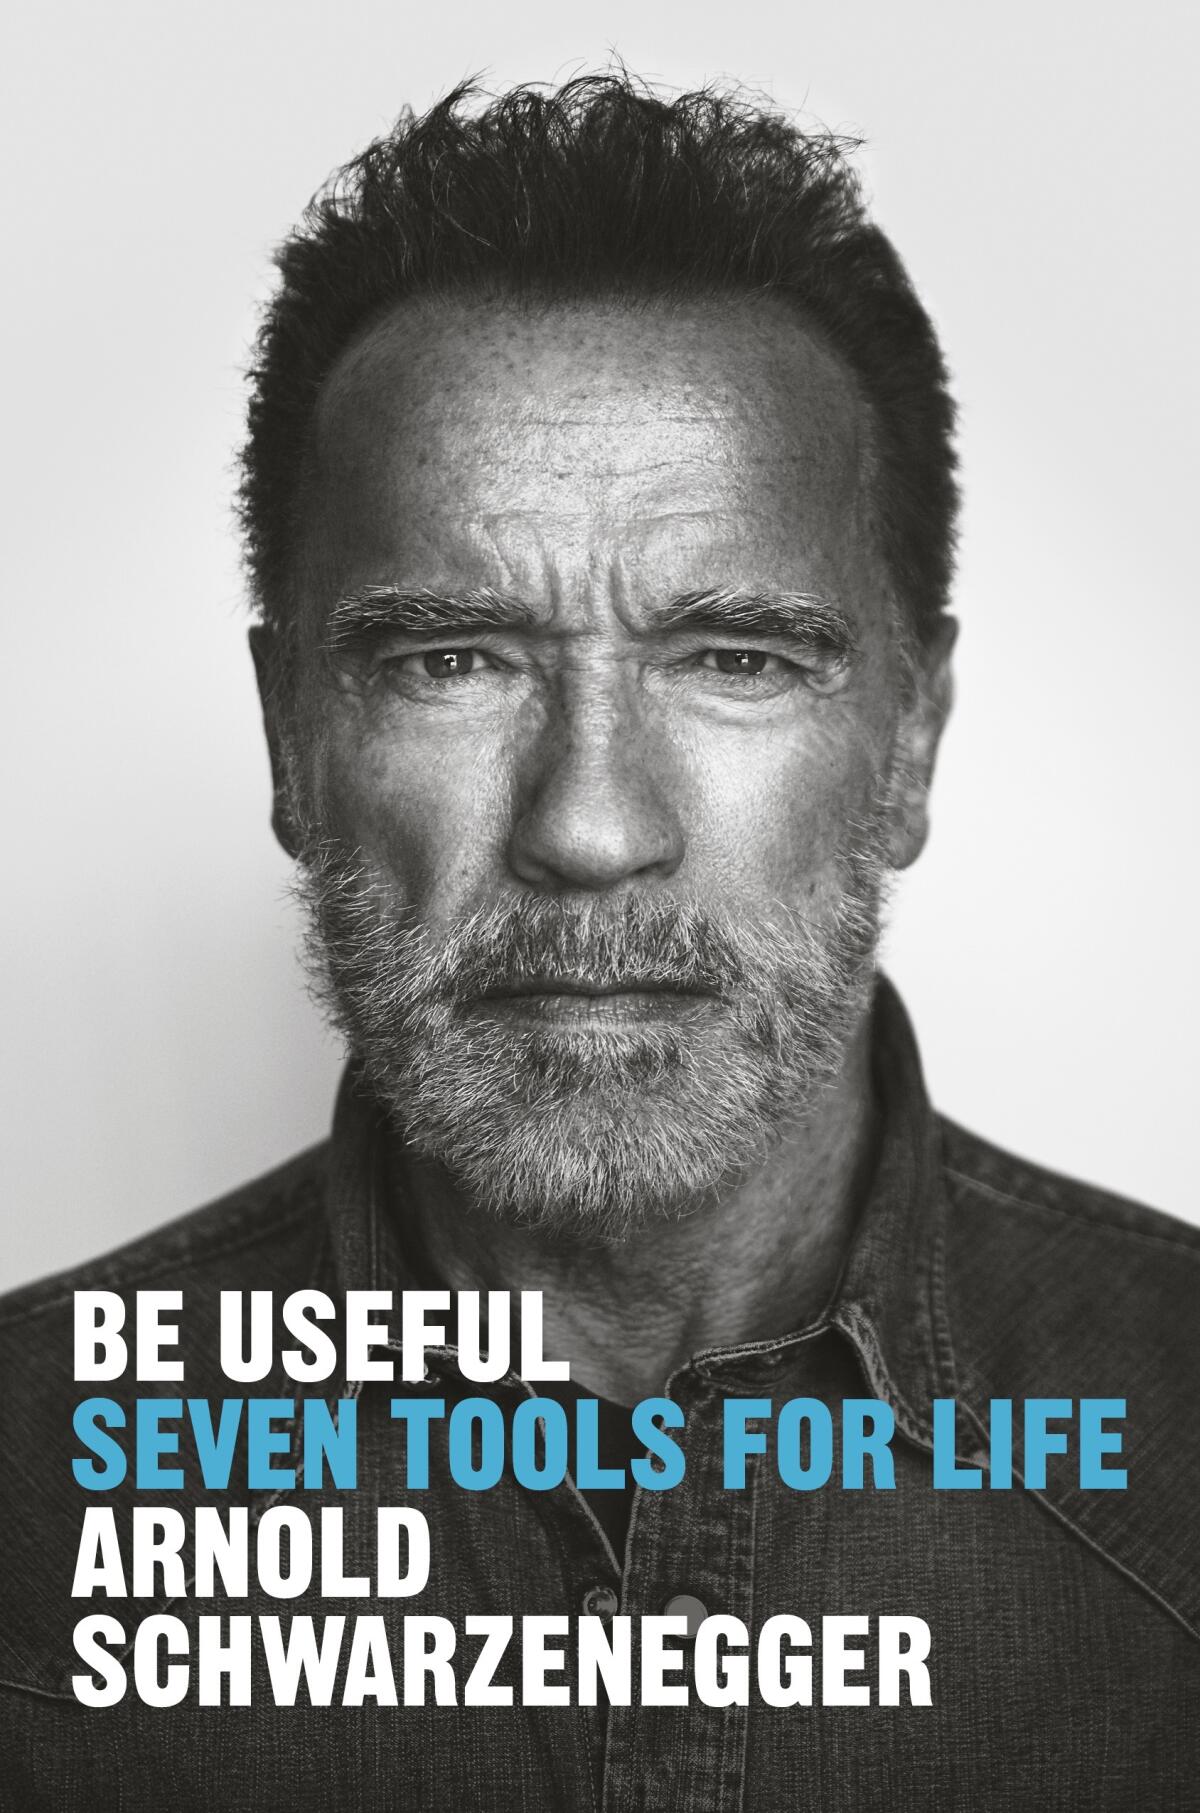 "Be Useful: Seven Tools for Life," by Arnold Schwarzenegger